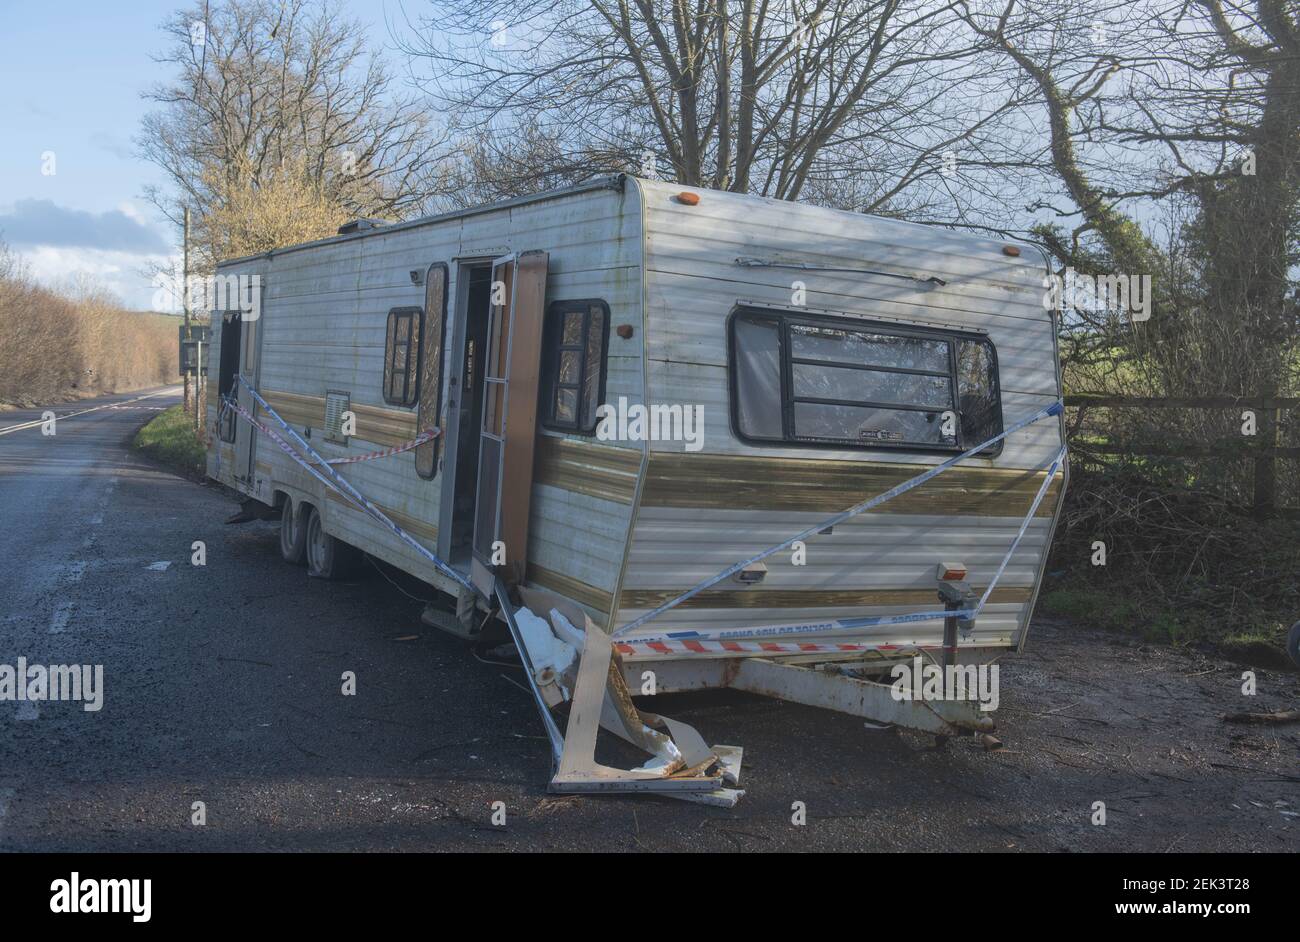 Abandoned  Caravan in a Lay-by on the A377 at Lapford Between Exeter and Barnstaple in Rural Devon, England, UK Stock Photo